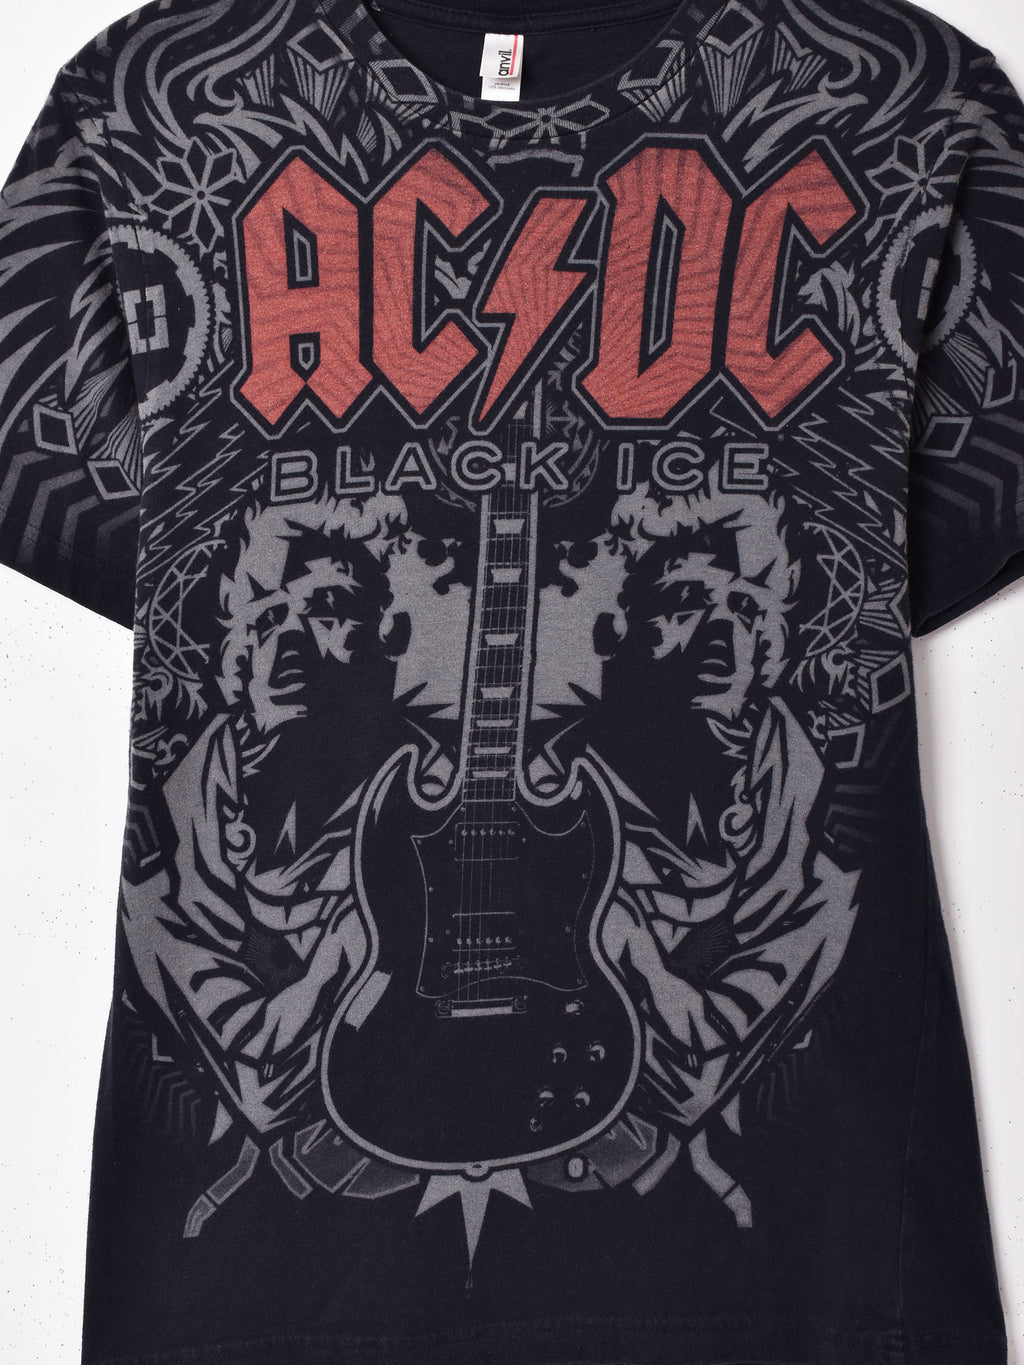 ACDC バンドTシャツ – 古着屋Top of the Hillのネット通販サイト